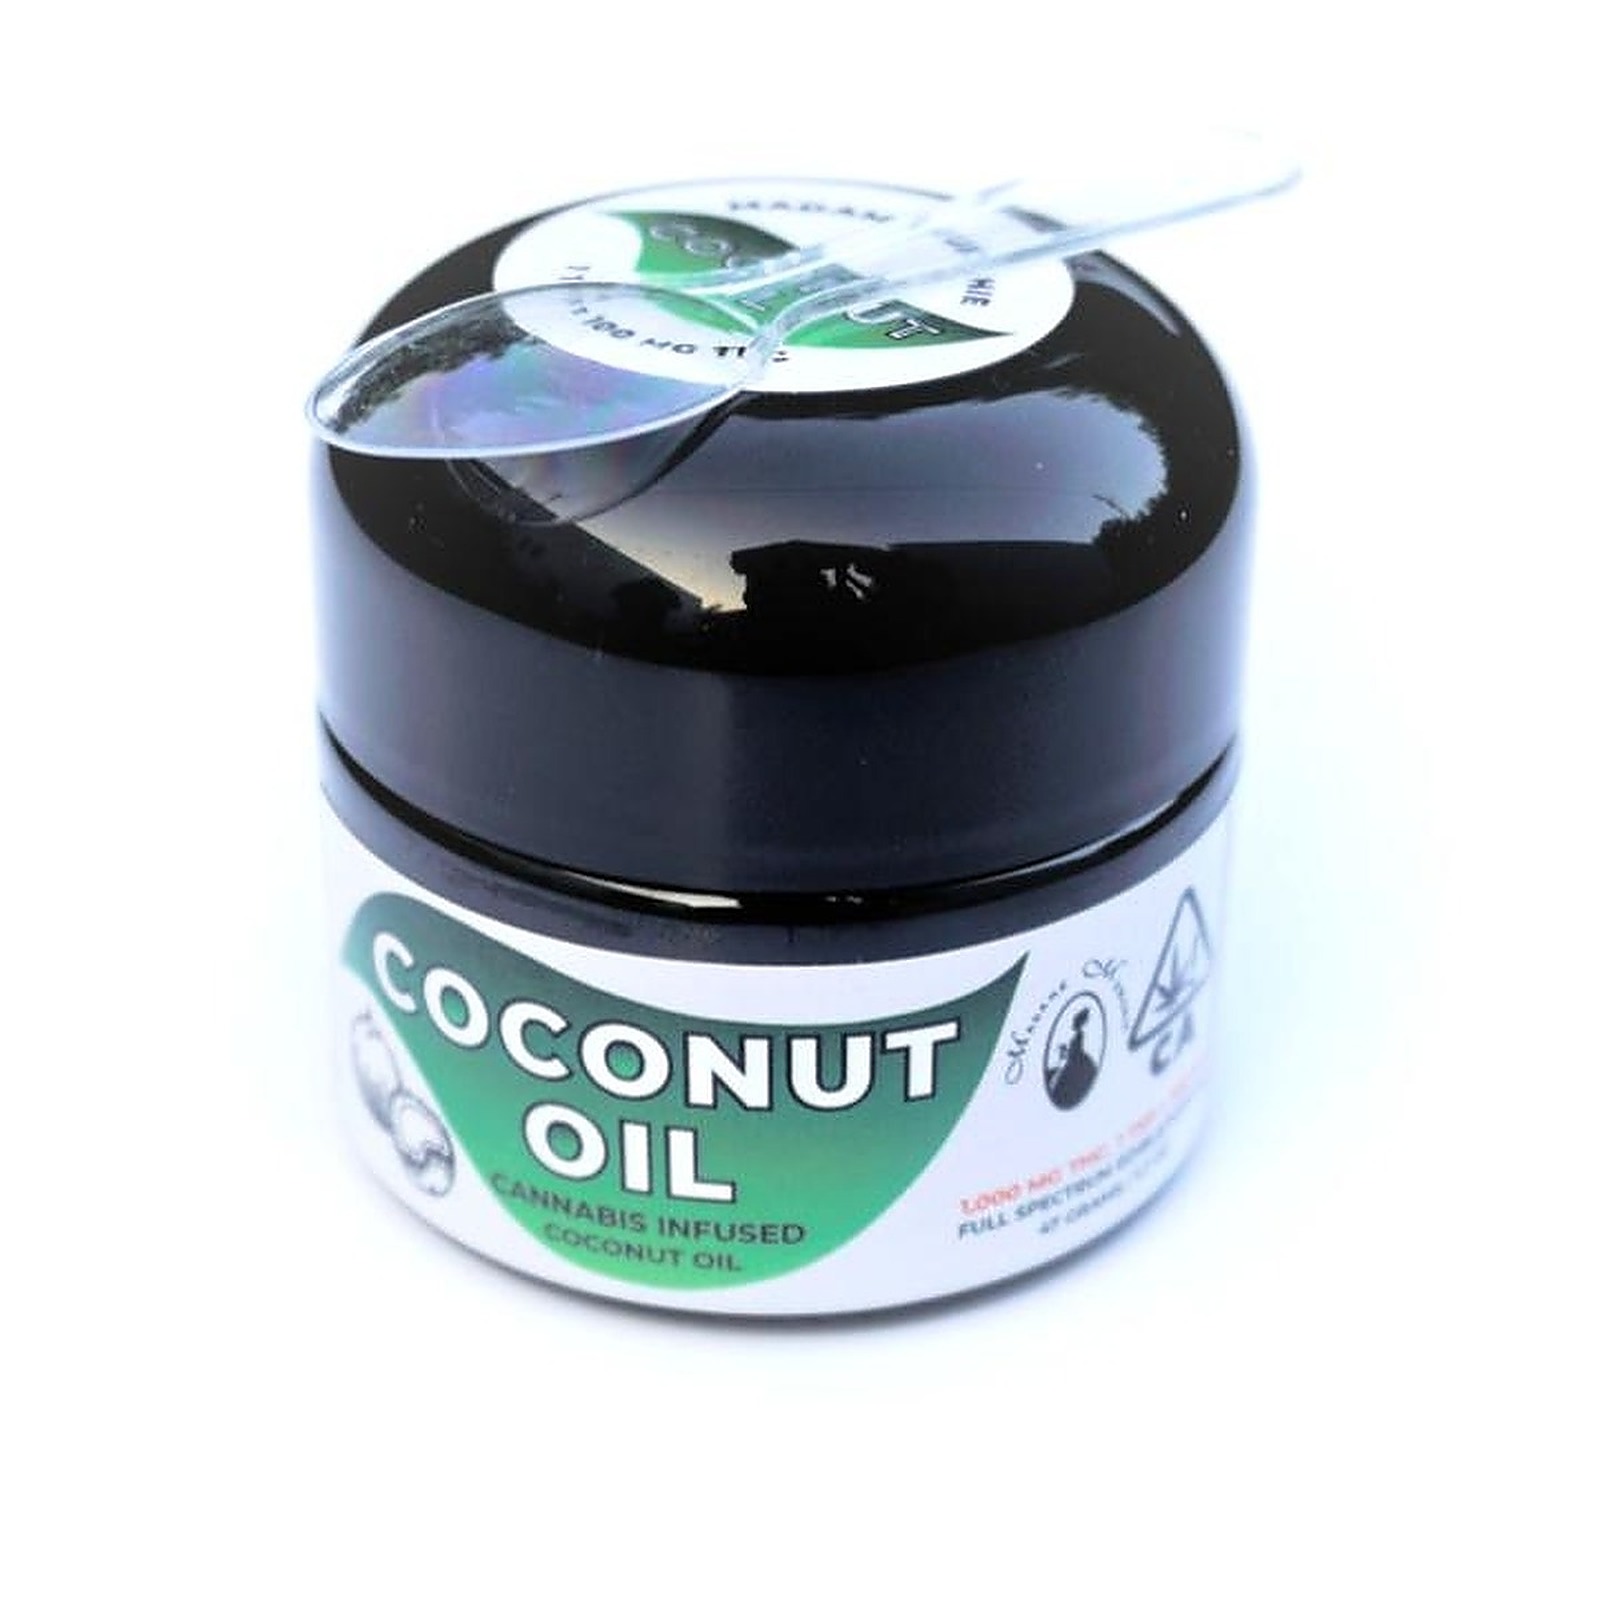 COCONUT OIL Cooking Edible or Topical Oil 1,000mg Jar